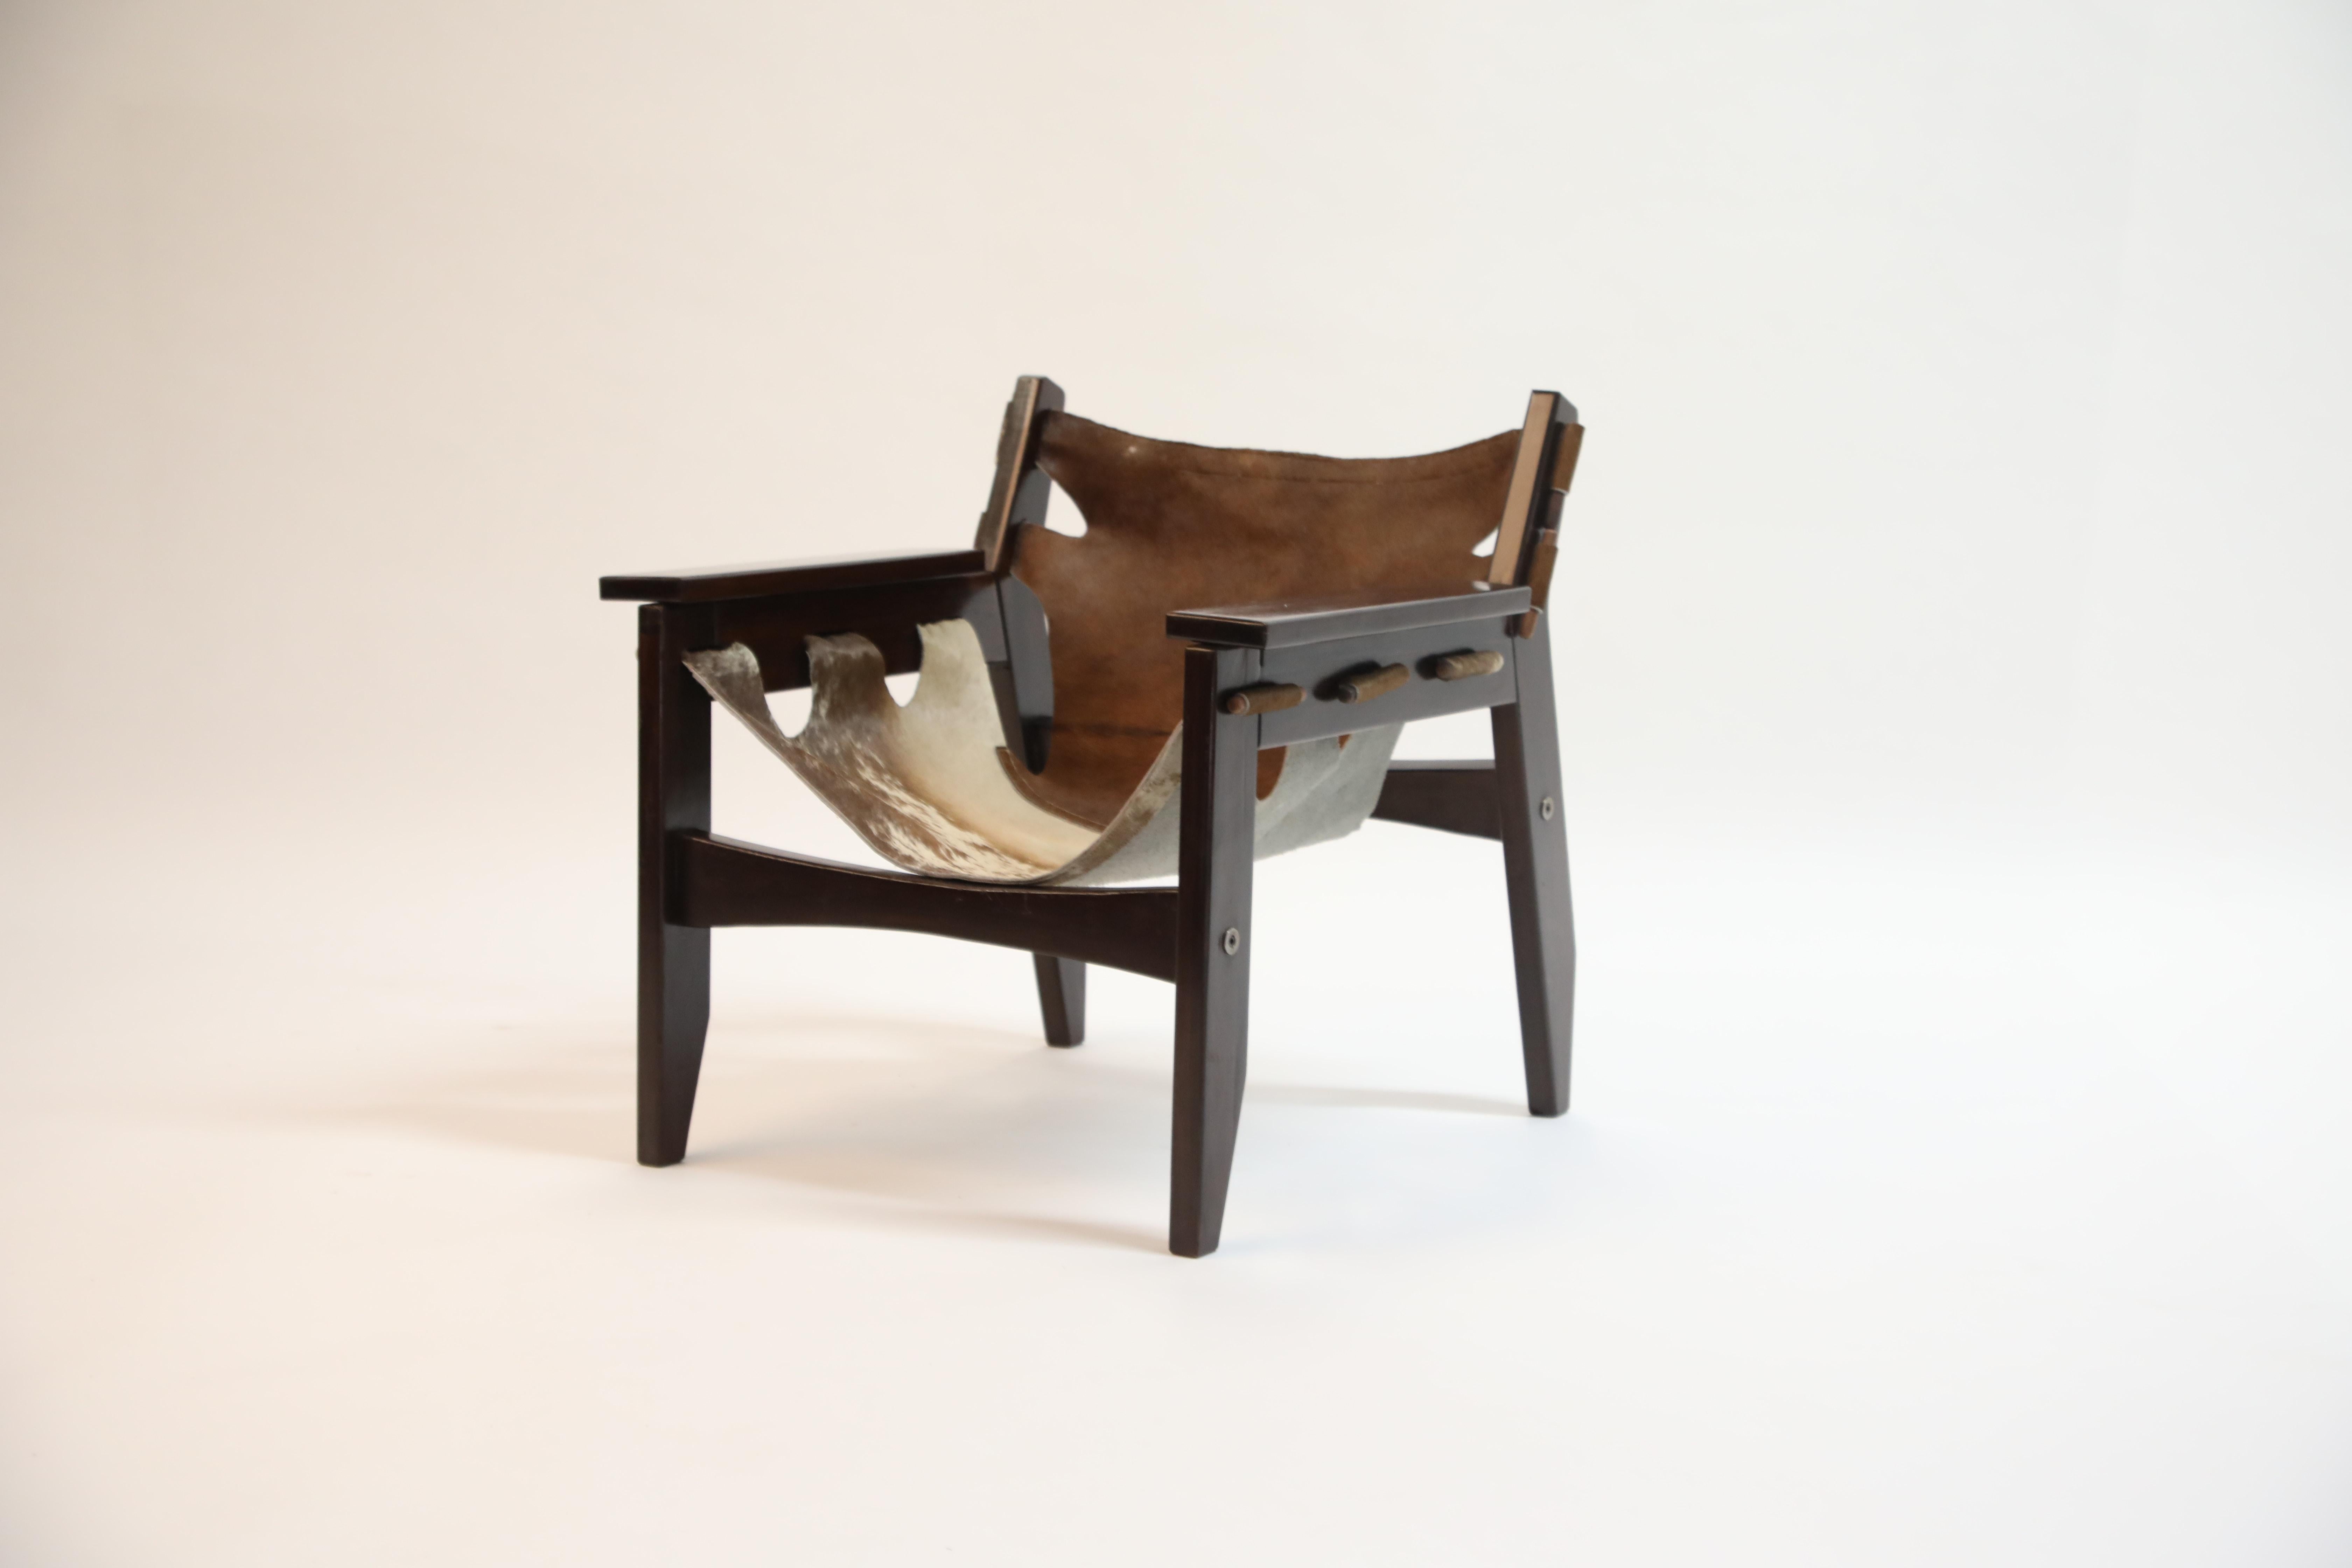 Brazilian Pair of Sergio Rodrigues Kilin Chairs in Rosewood and Cowhide, OCA, Brazil 1970s